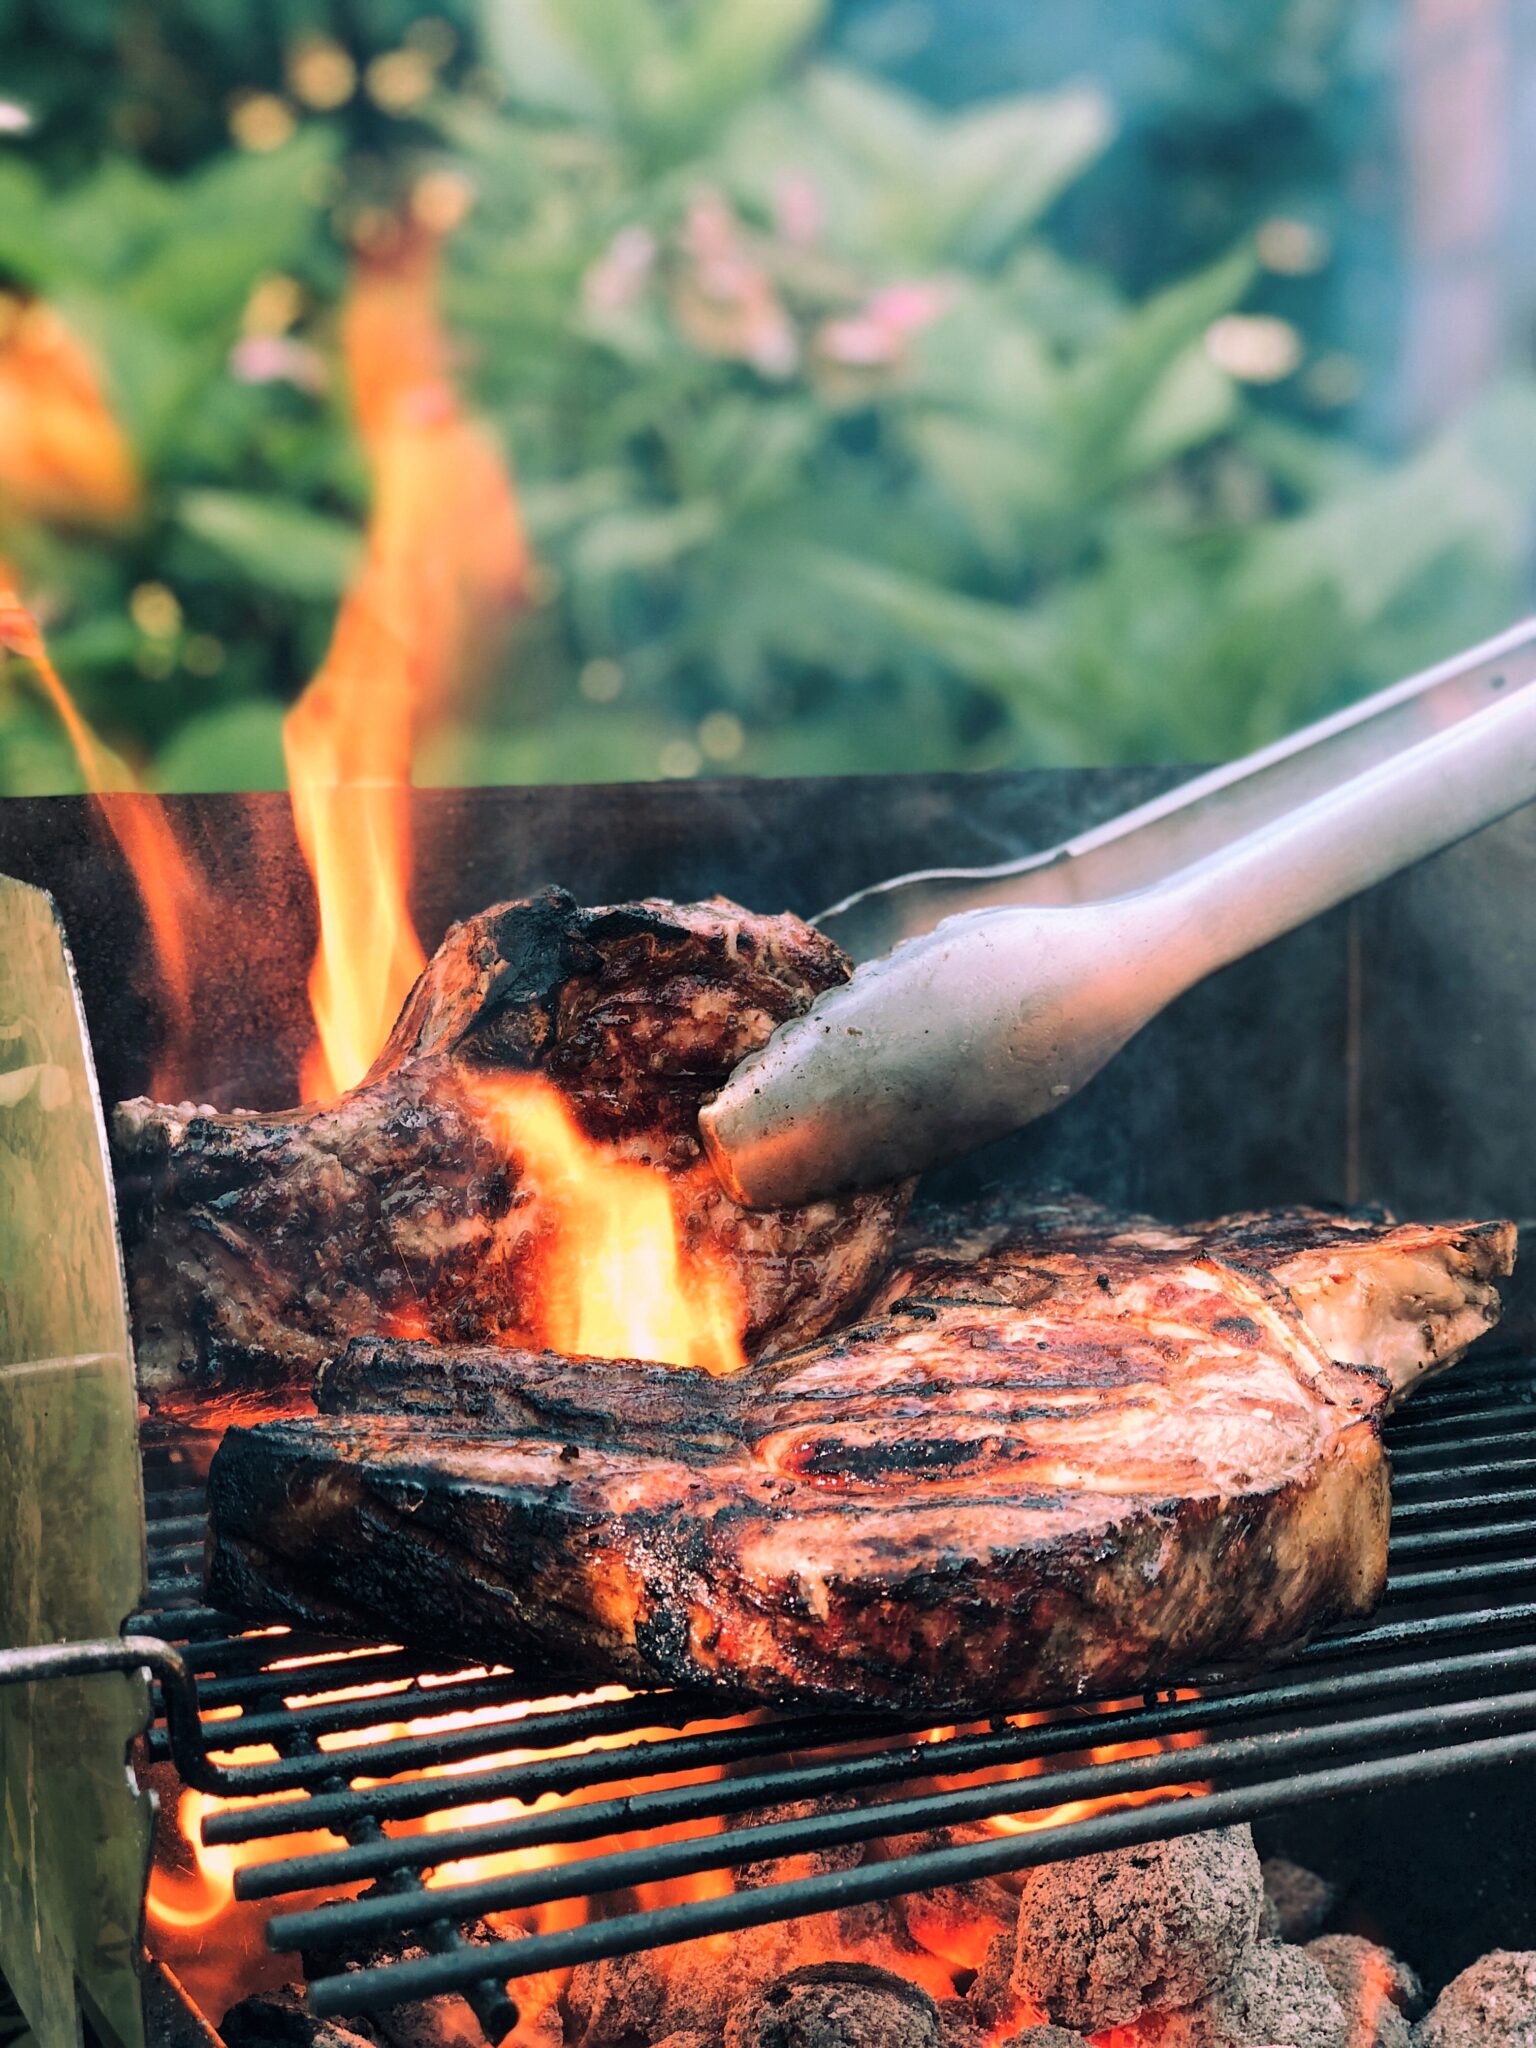 Steak being BBQ'd on a charcoal BBQ. The fire is rising high and a pair of tongs are being used to flip the meat. This article covers how to host the perfect family BBQ.